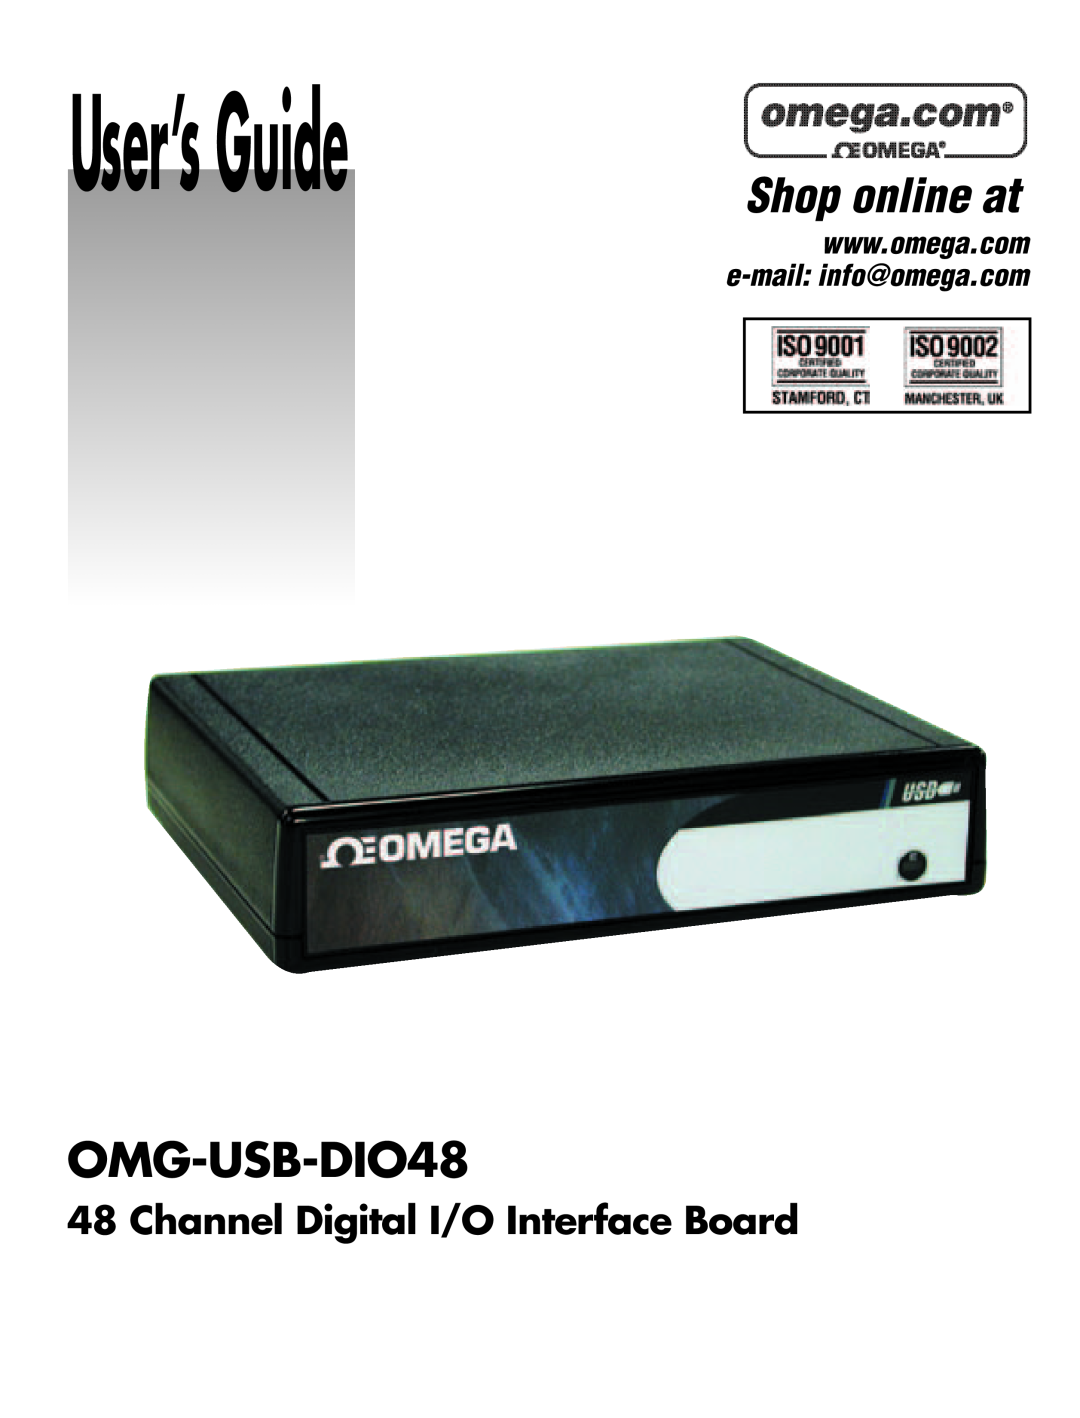 Omega Vehicle Security OMG-USB-DIO48 manual Channel Digital I/O Interface Board, User’sGuide, Shop online at 